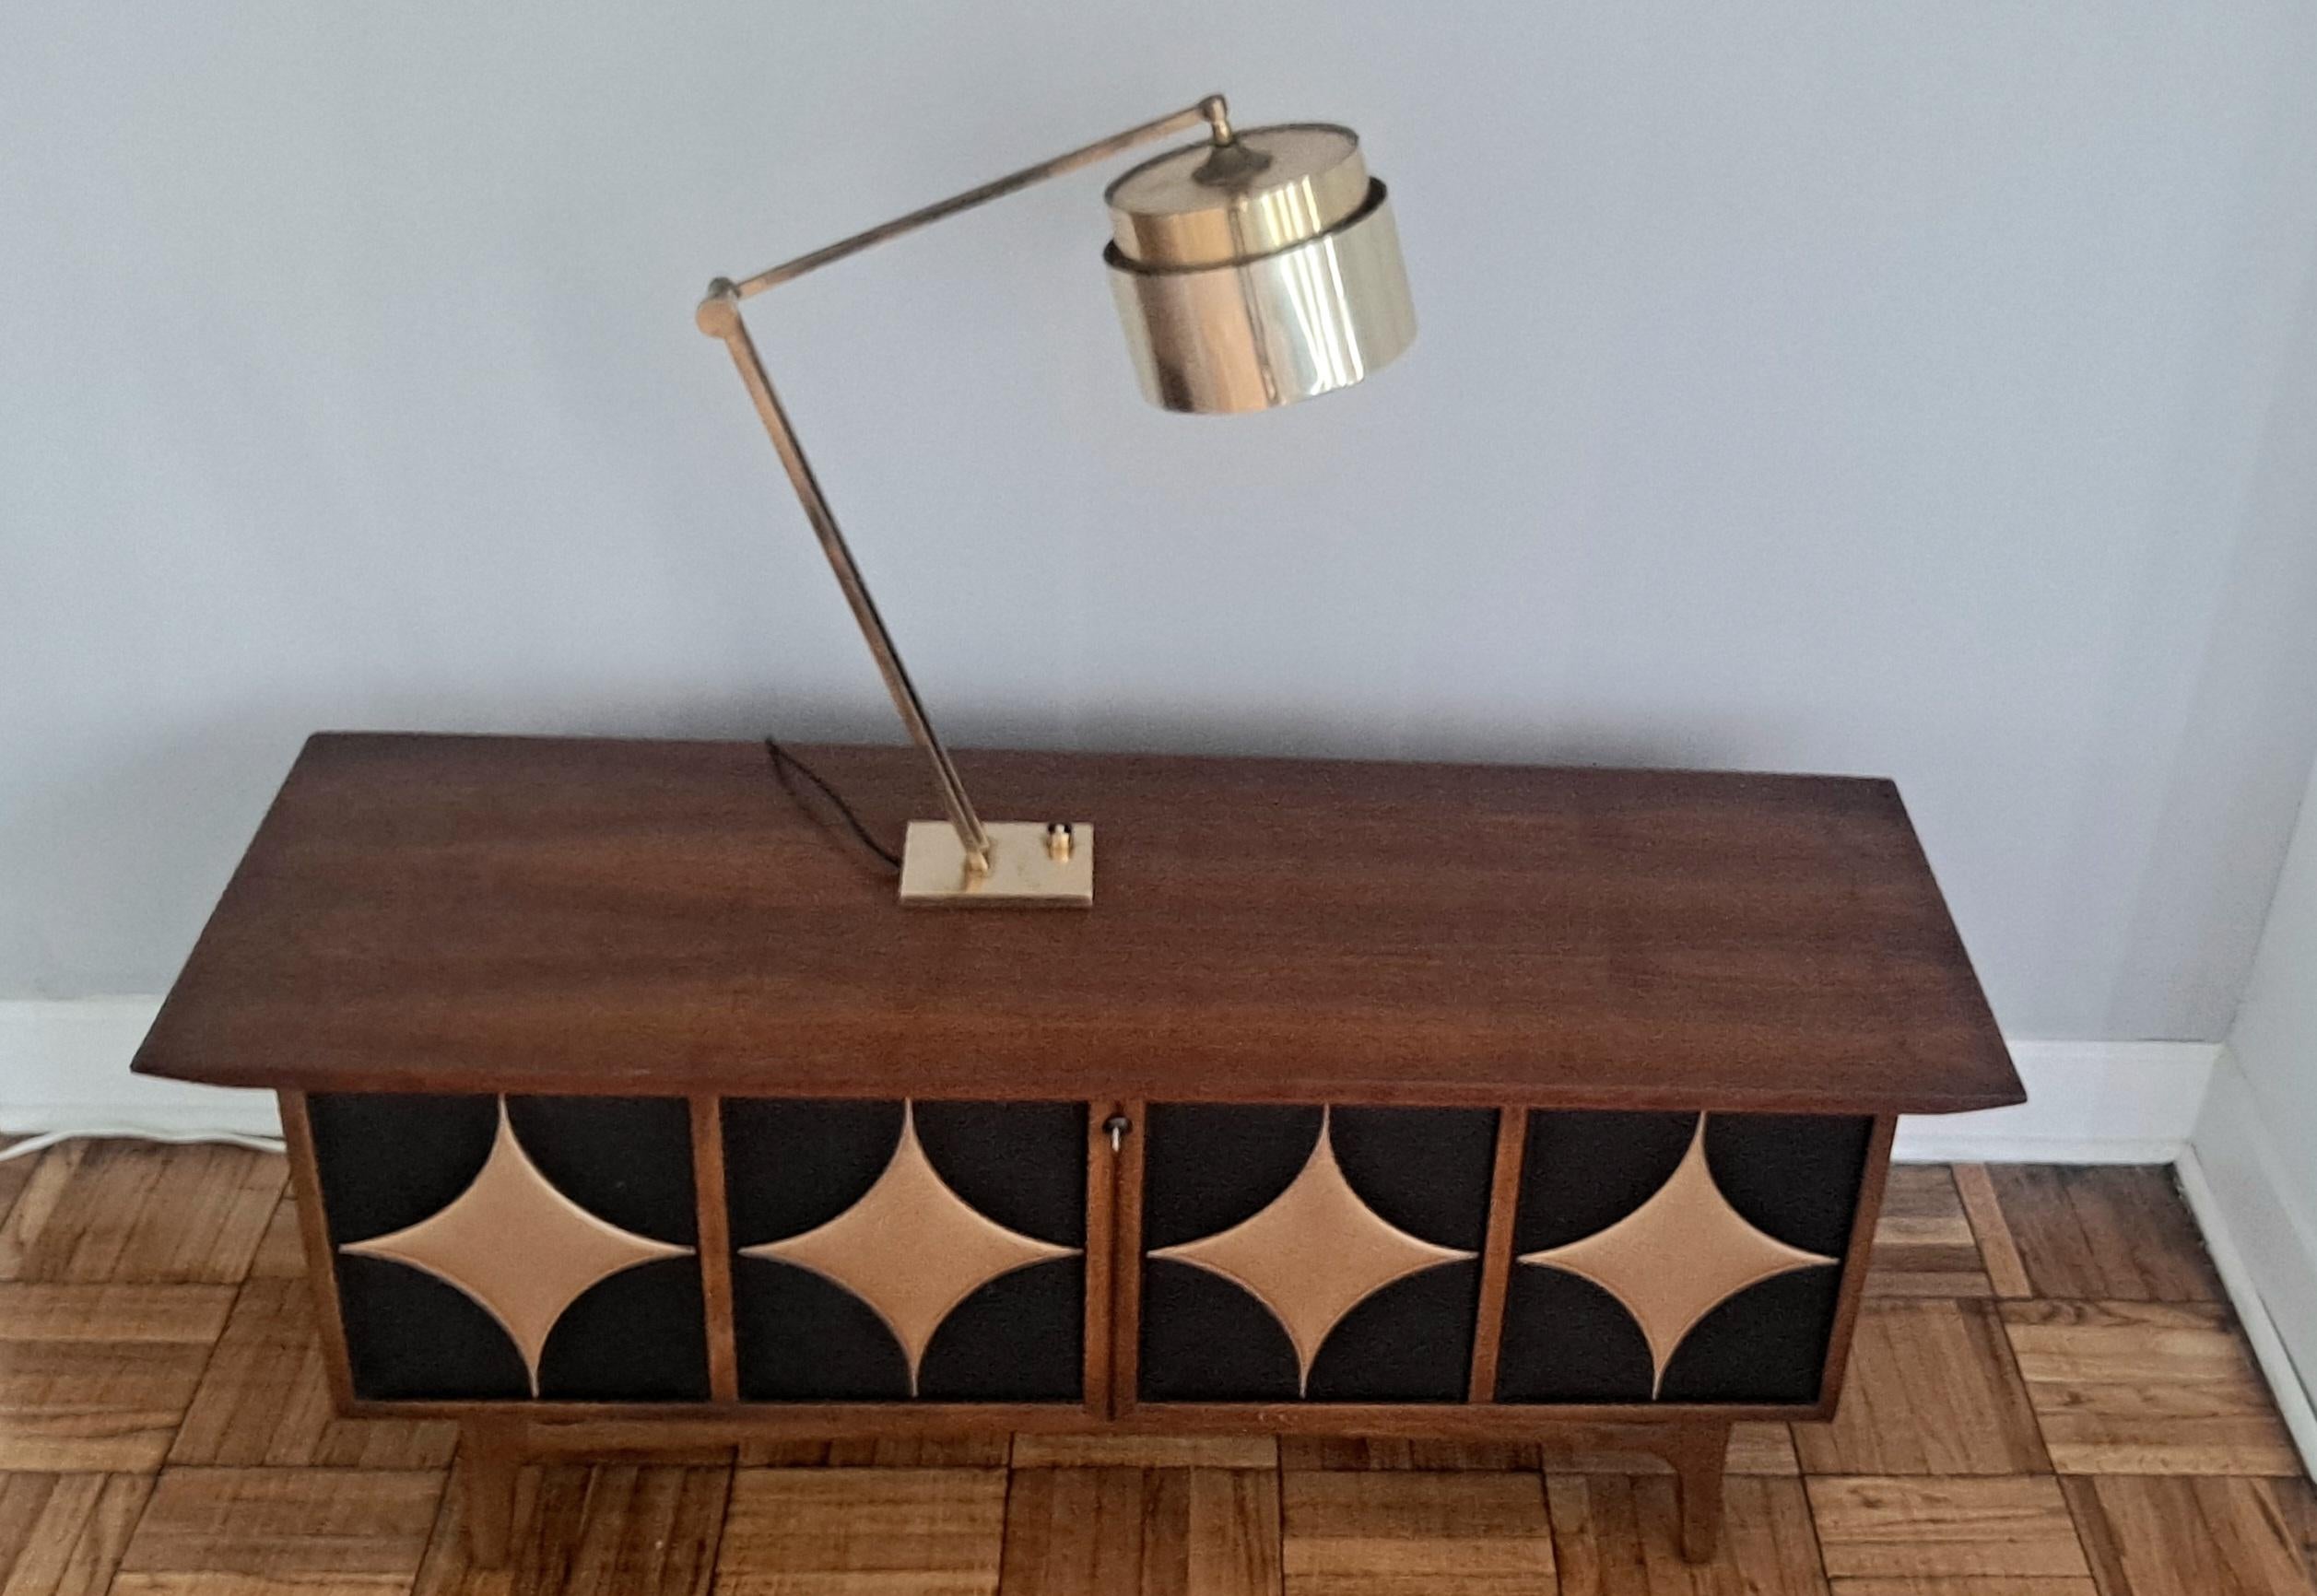 Italian brass table - desk lamp, sign on the base as shown on the photos. Pivoting neck of the lamp It will change the height of the shade. Desk lamp have 2 heights the higher is 31 inches and the presented one is 20 inches.